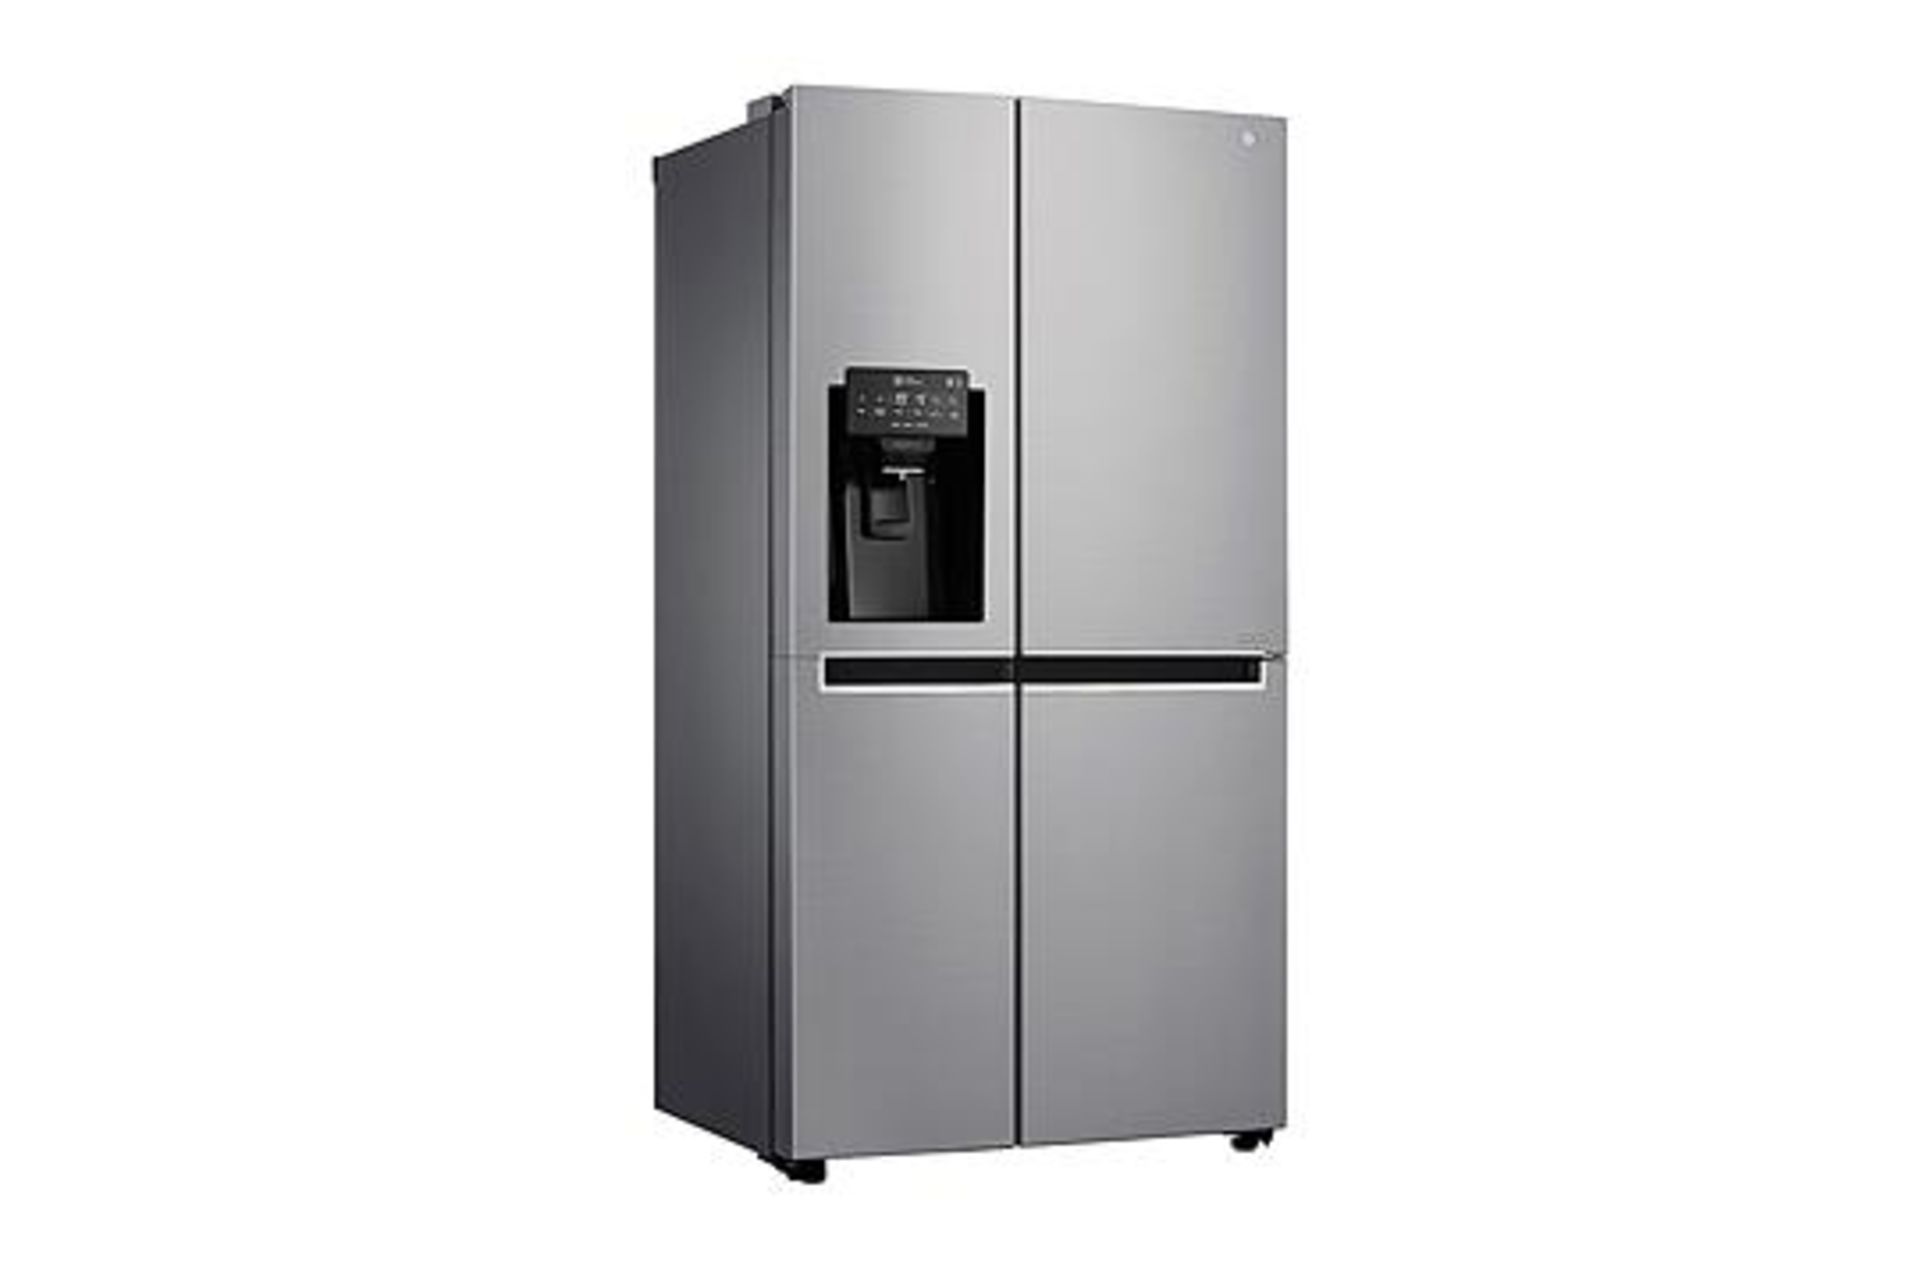 1 x LG GSL961 PXBV Stainless Steel American Style Fridge Freezer With Water and Ice Dispenser - - Image 4 of 8